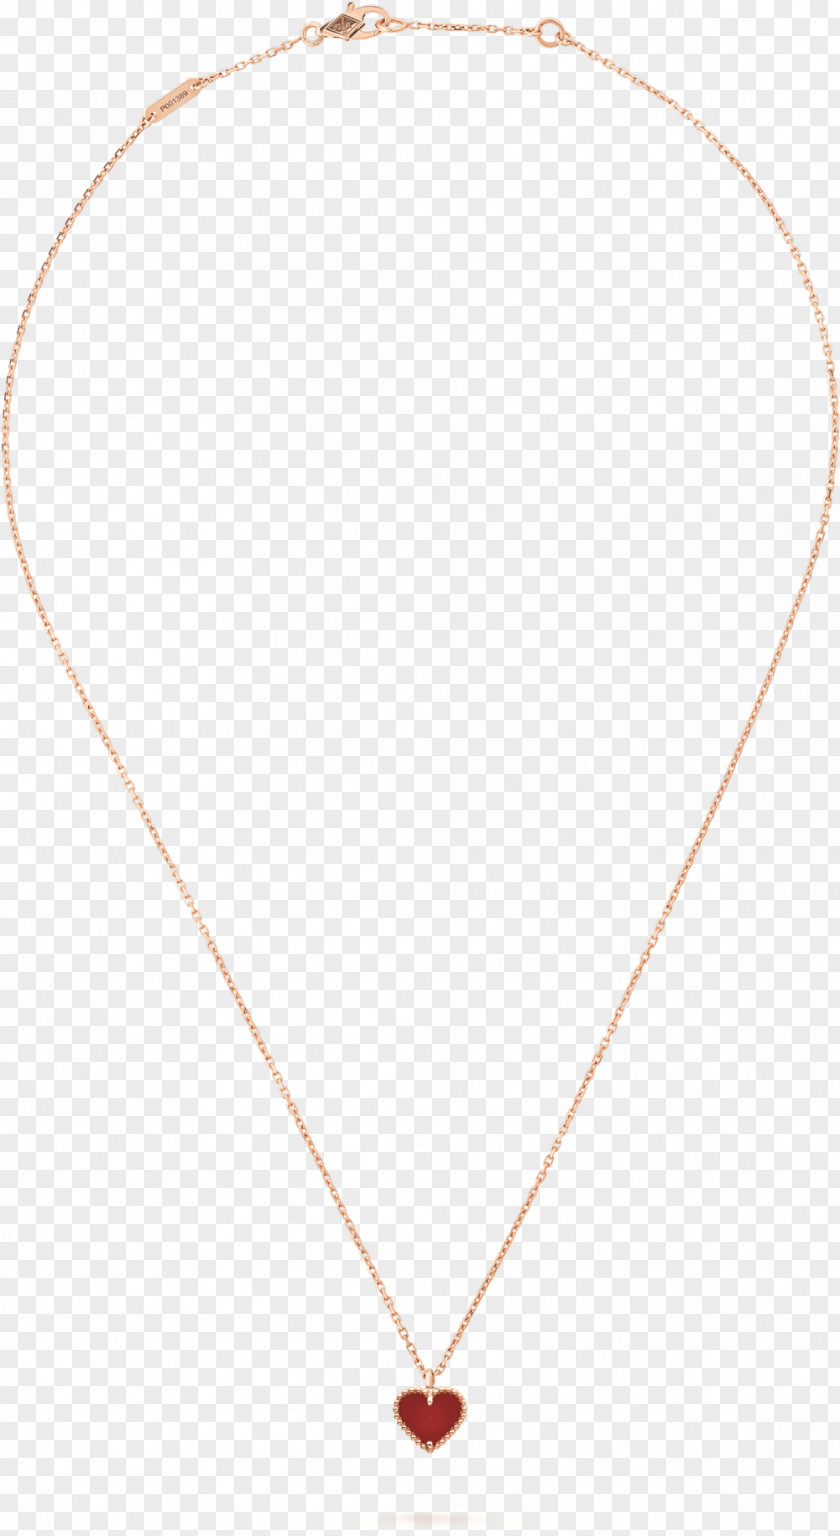 Heart Body Jewellery Background PNG